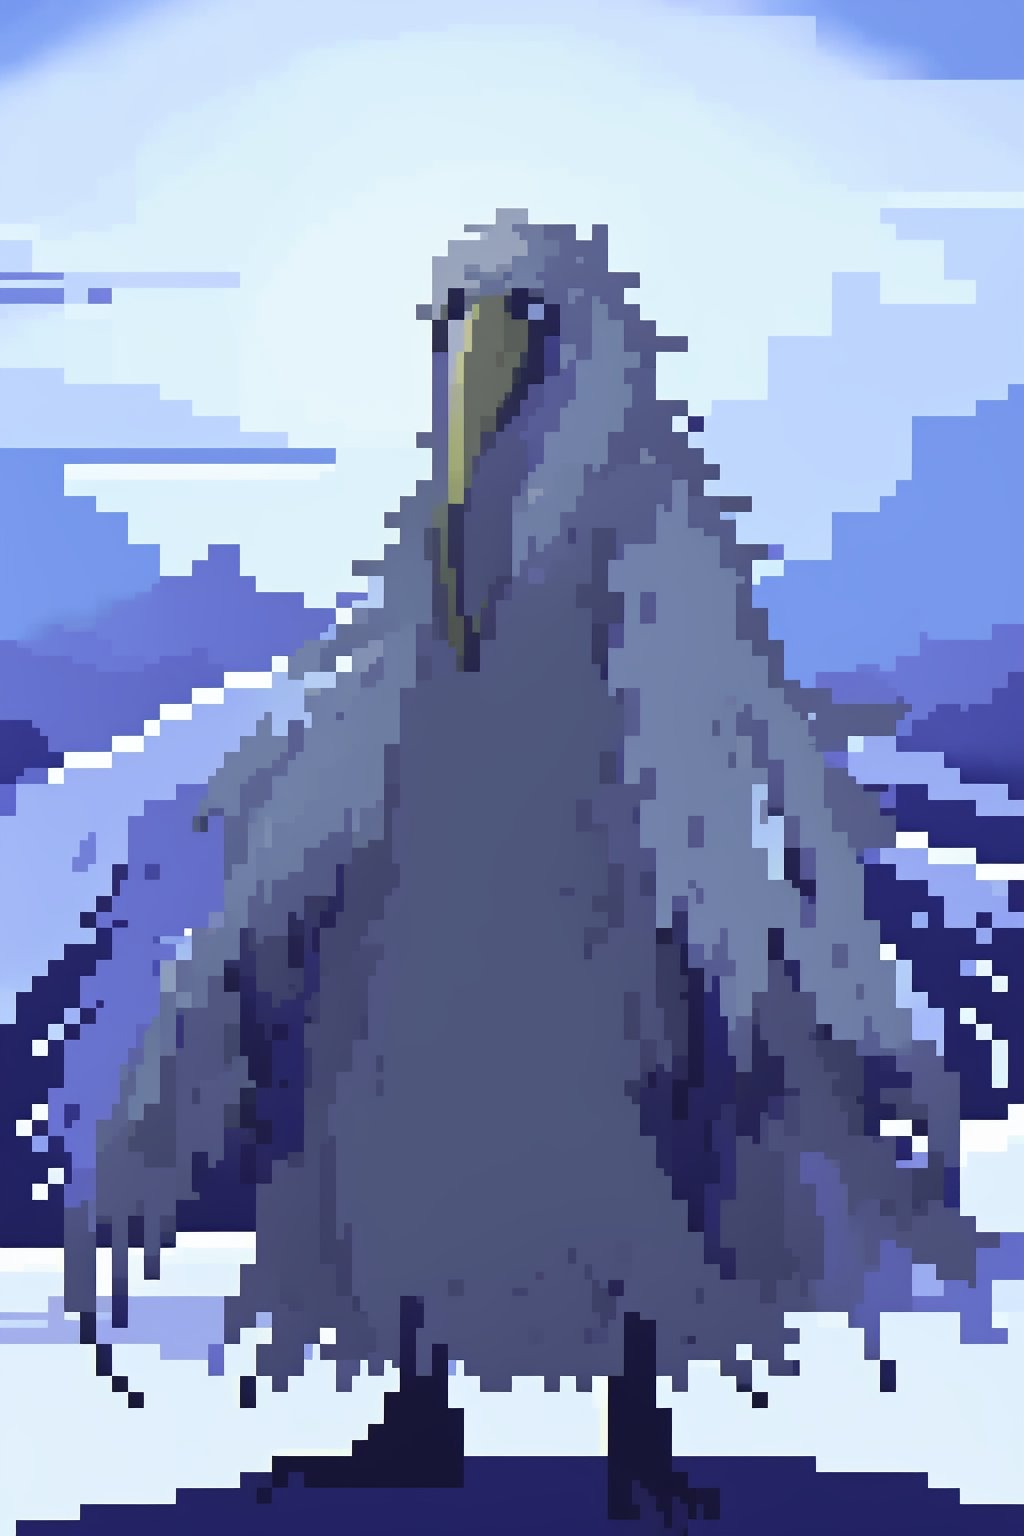 Opium bird, standing, feathers, white feathers, bird, birdman, humanoid, bird head, with extremely long beak, long beak, long mouth, full body, bird legs, bird arms, sinister, terrifying, beautiful , ragged, wide body, fat

High quality, HD, 4kHD, cinematic, atmospheric, realistic, ultra-realistic
snow, mountain, cloudy, gray sky, dark clouds
Detail,lora:largebulg1-000012:1,AIDA_NH_humans,Pixel art